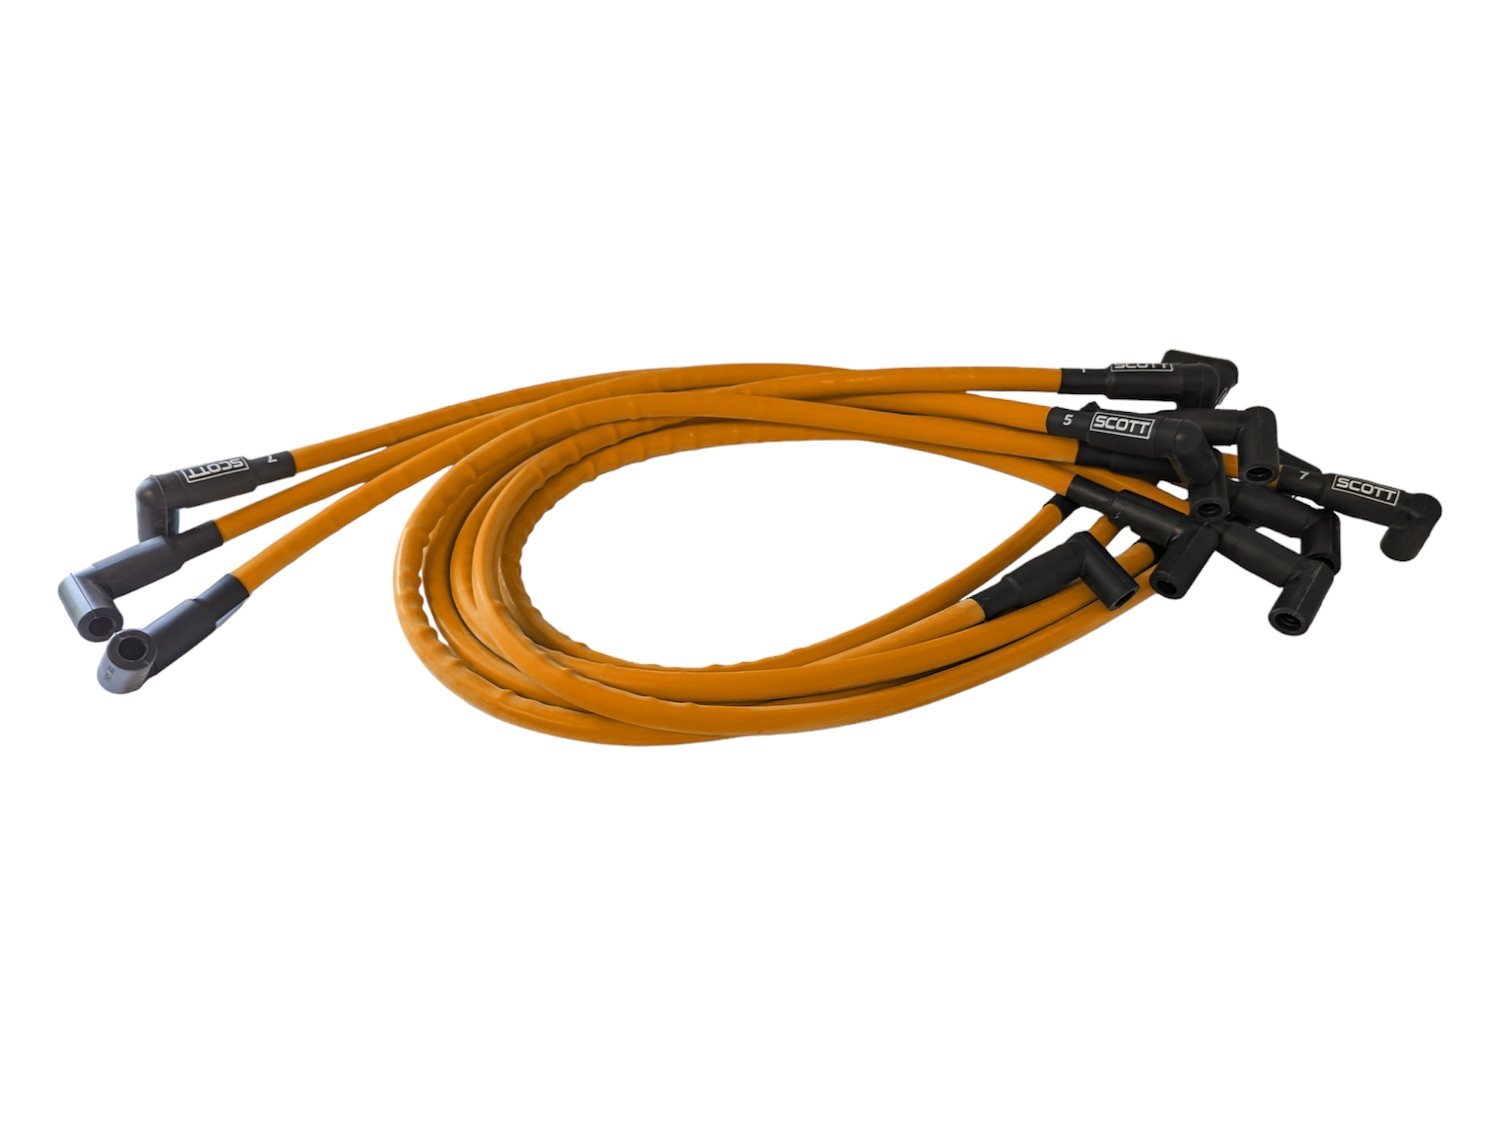 SPW300-CH-435-5 Super Mag Fiberglass-Oversleeved Spark Plug Wire Set for Small Block Chevy, Around Front [Orange]